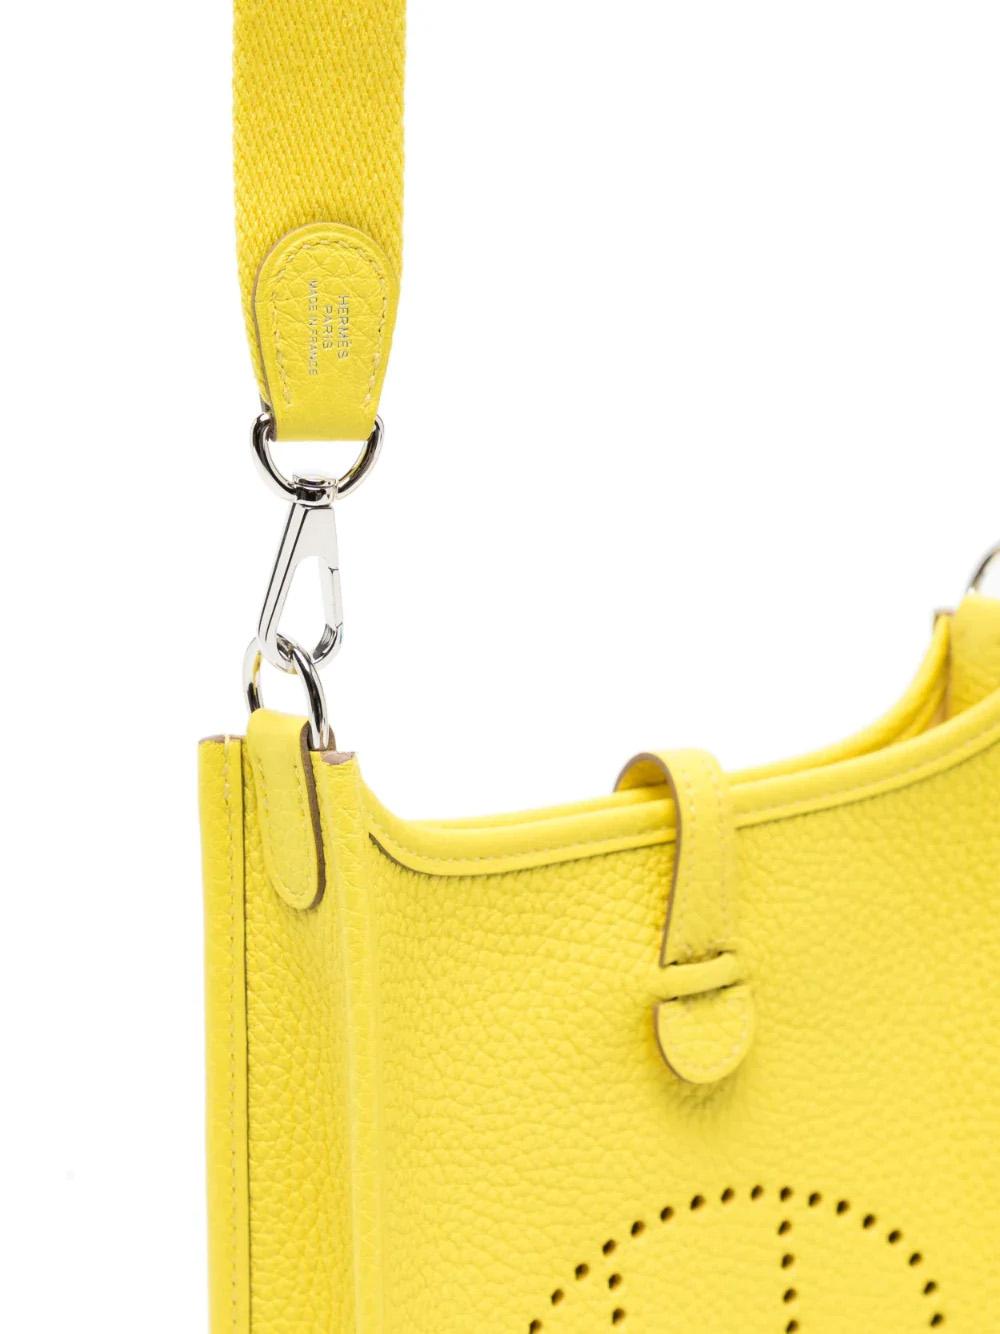 This is a timeless shoulder bag originally designed by Evelyne Bertrand in 1978. Crafted with yellow leather, the bag features the signature perforated H logo and palladium-plated hardware. Offering a press-stud fastening, main compartment, and an